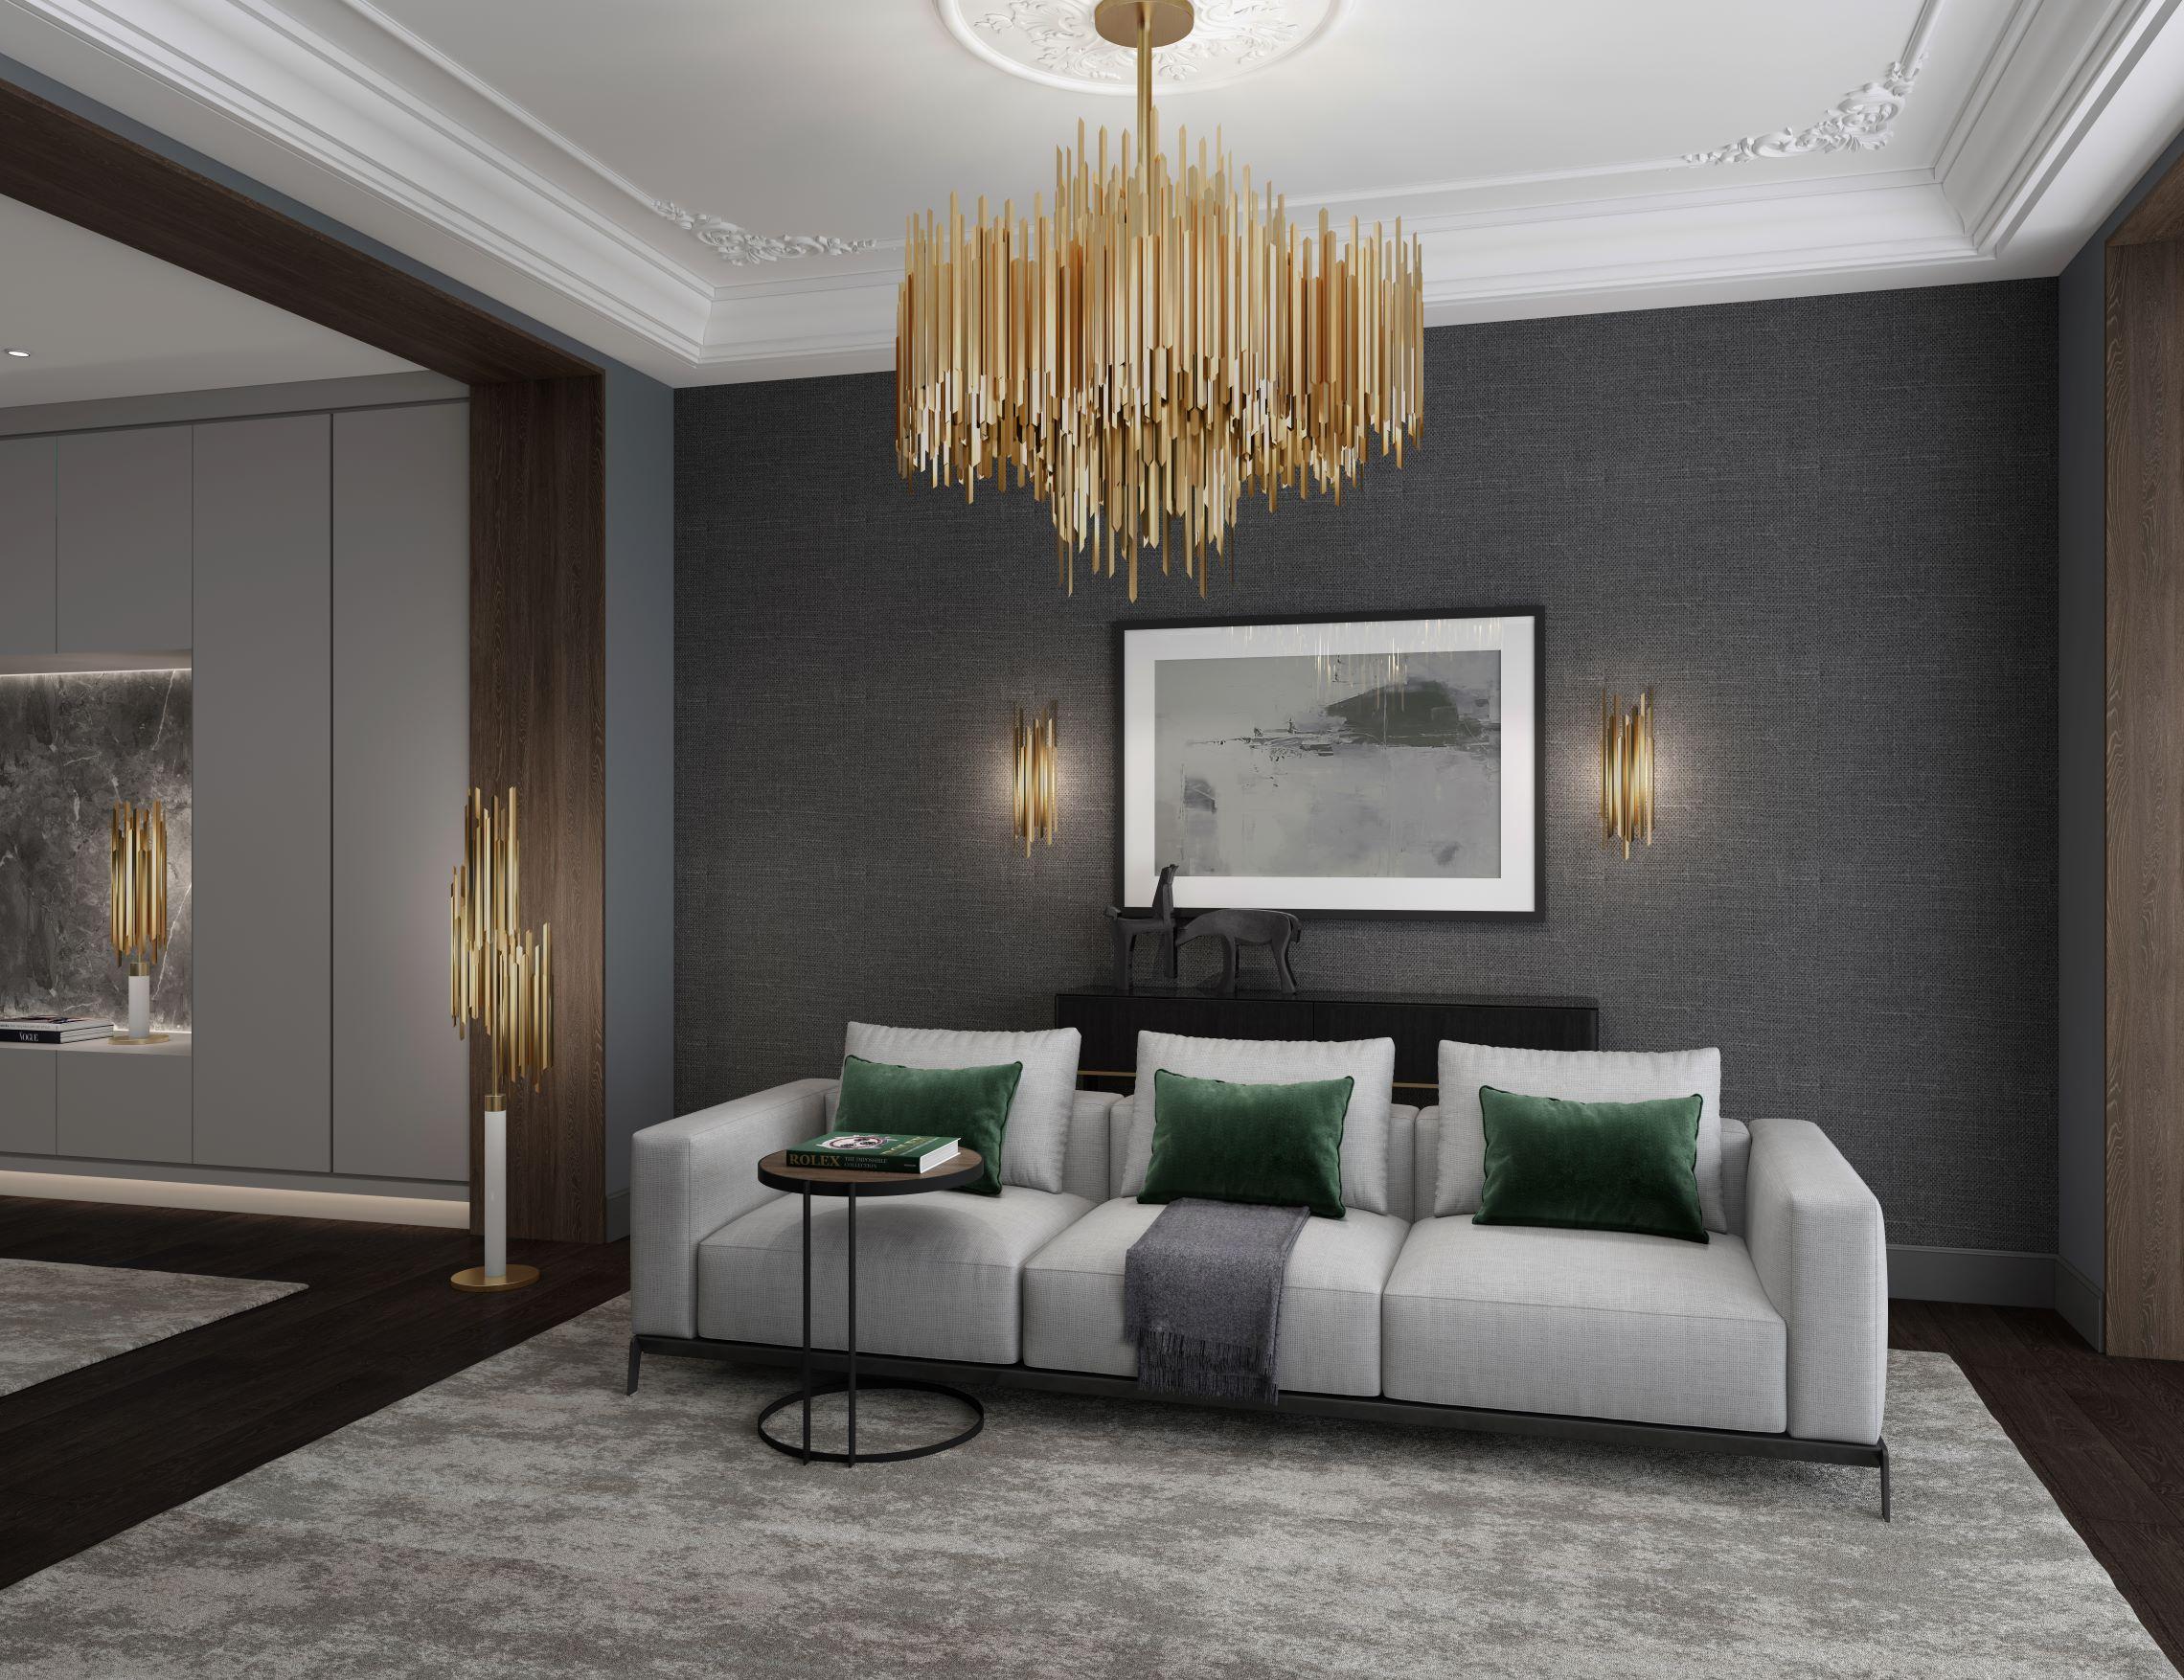 This chandelier is part of a visionary collection that uses the exceptional qualities of brass and the fascinating formation of ice shards to create a chic and unusual collection of lighting perfect for giving an exclusive feel to any